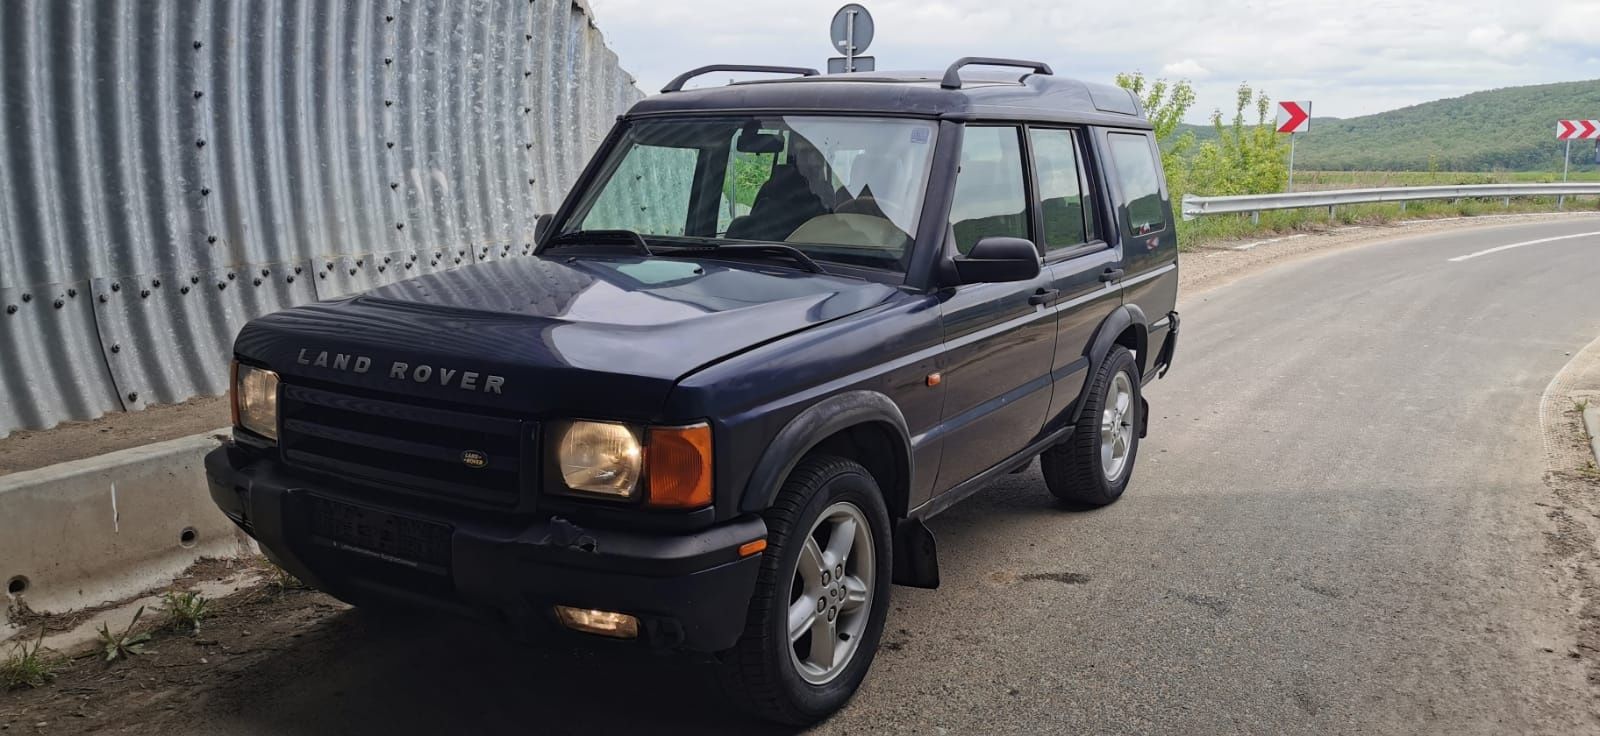 Land rover Discovery 2.5 tdi an 2000 4x4